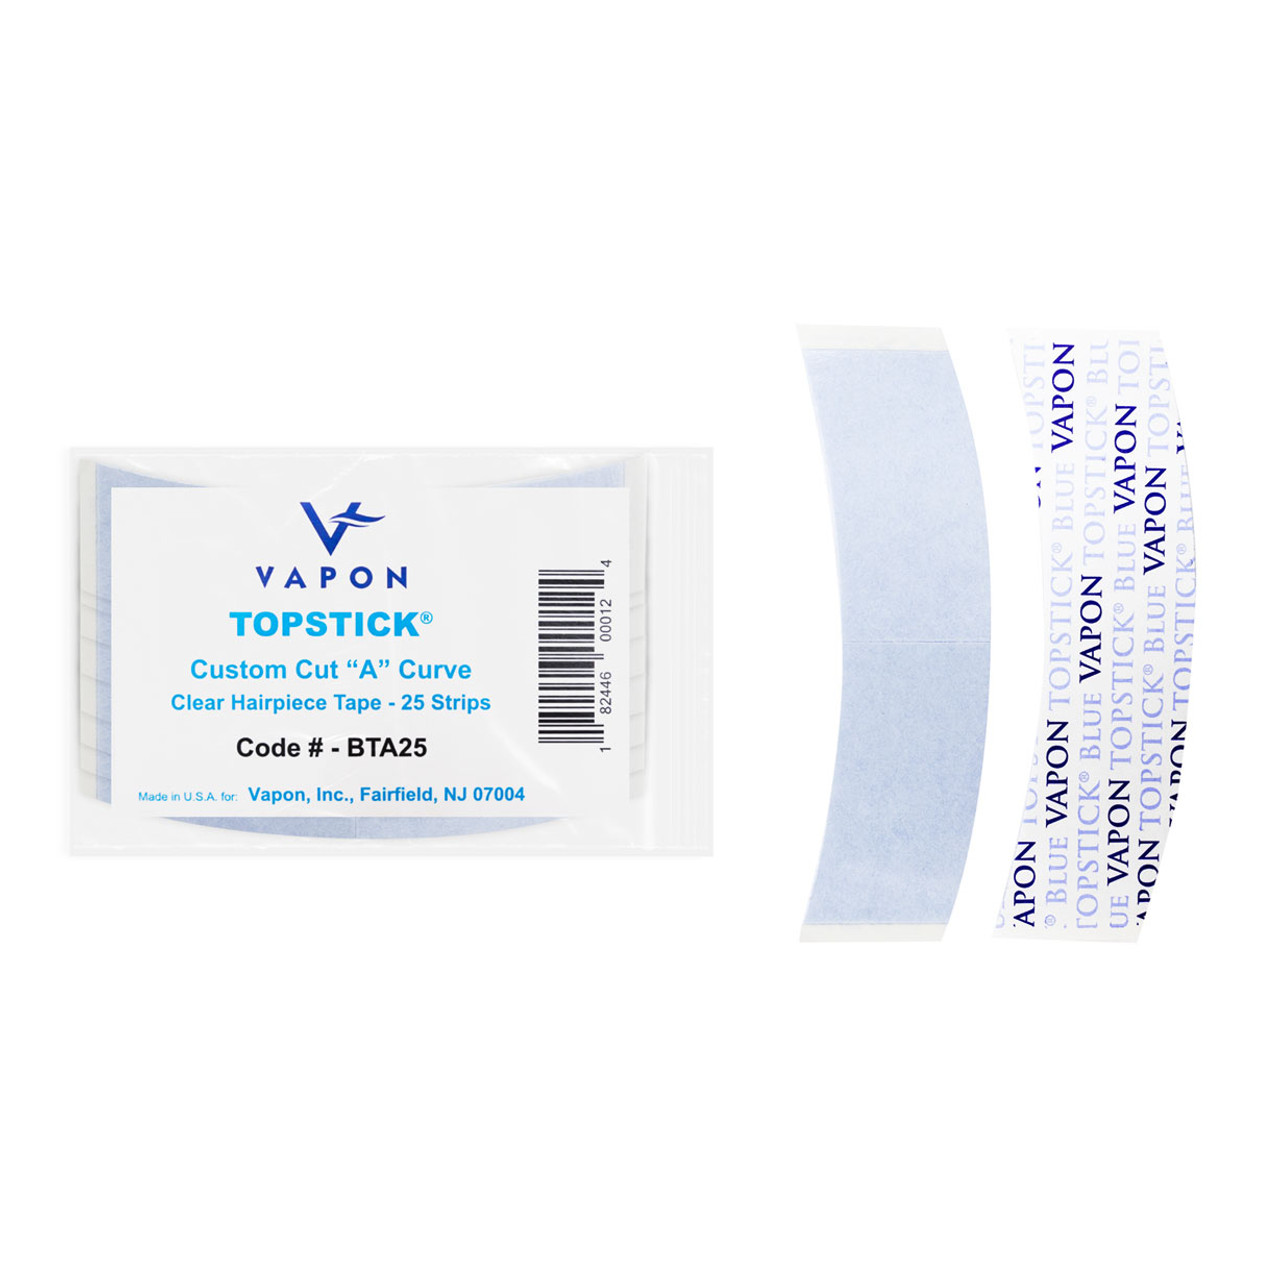 Vapon Topstick - Grooming Tape - 50 Count 1 x 3 Double Sided